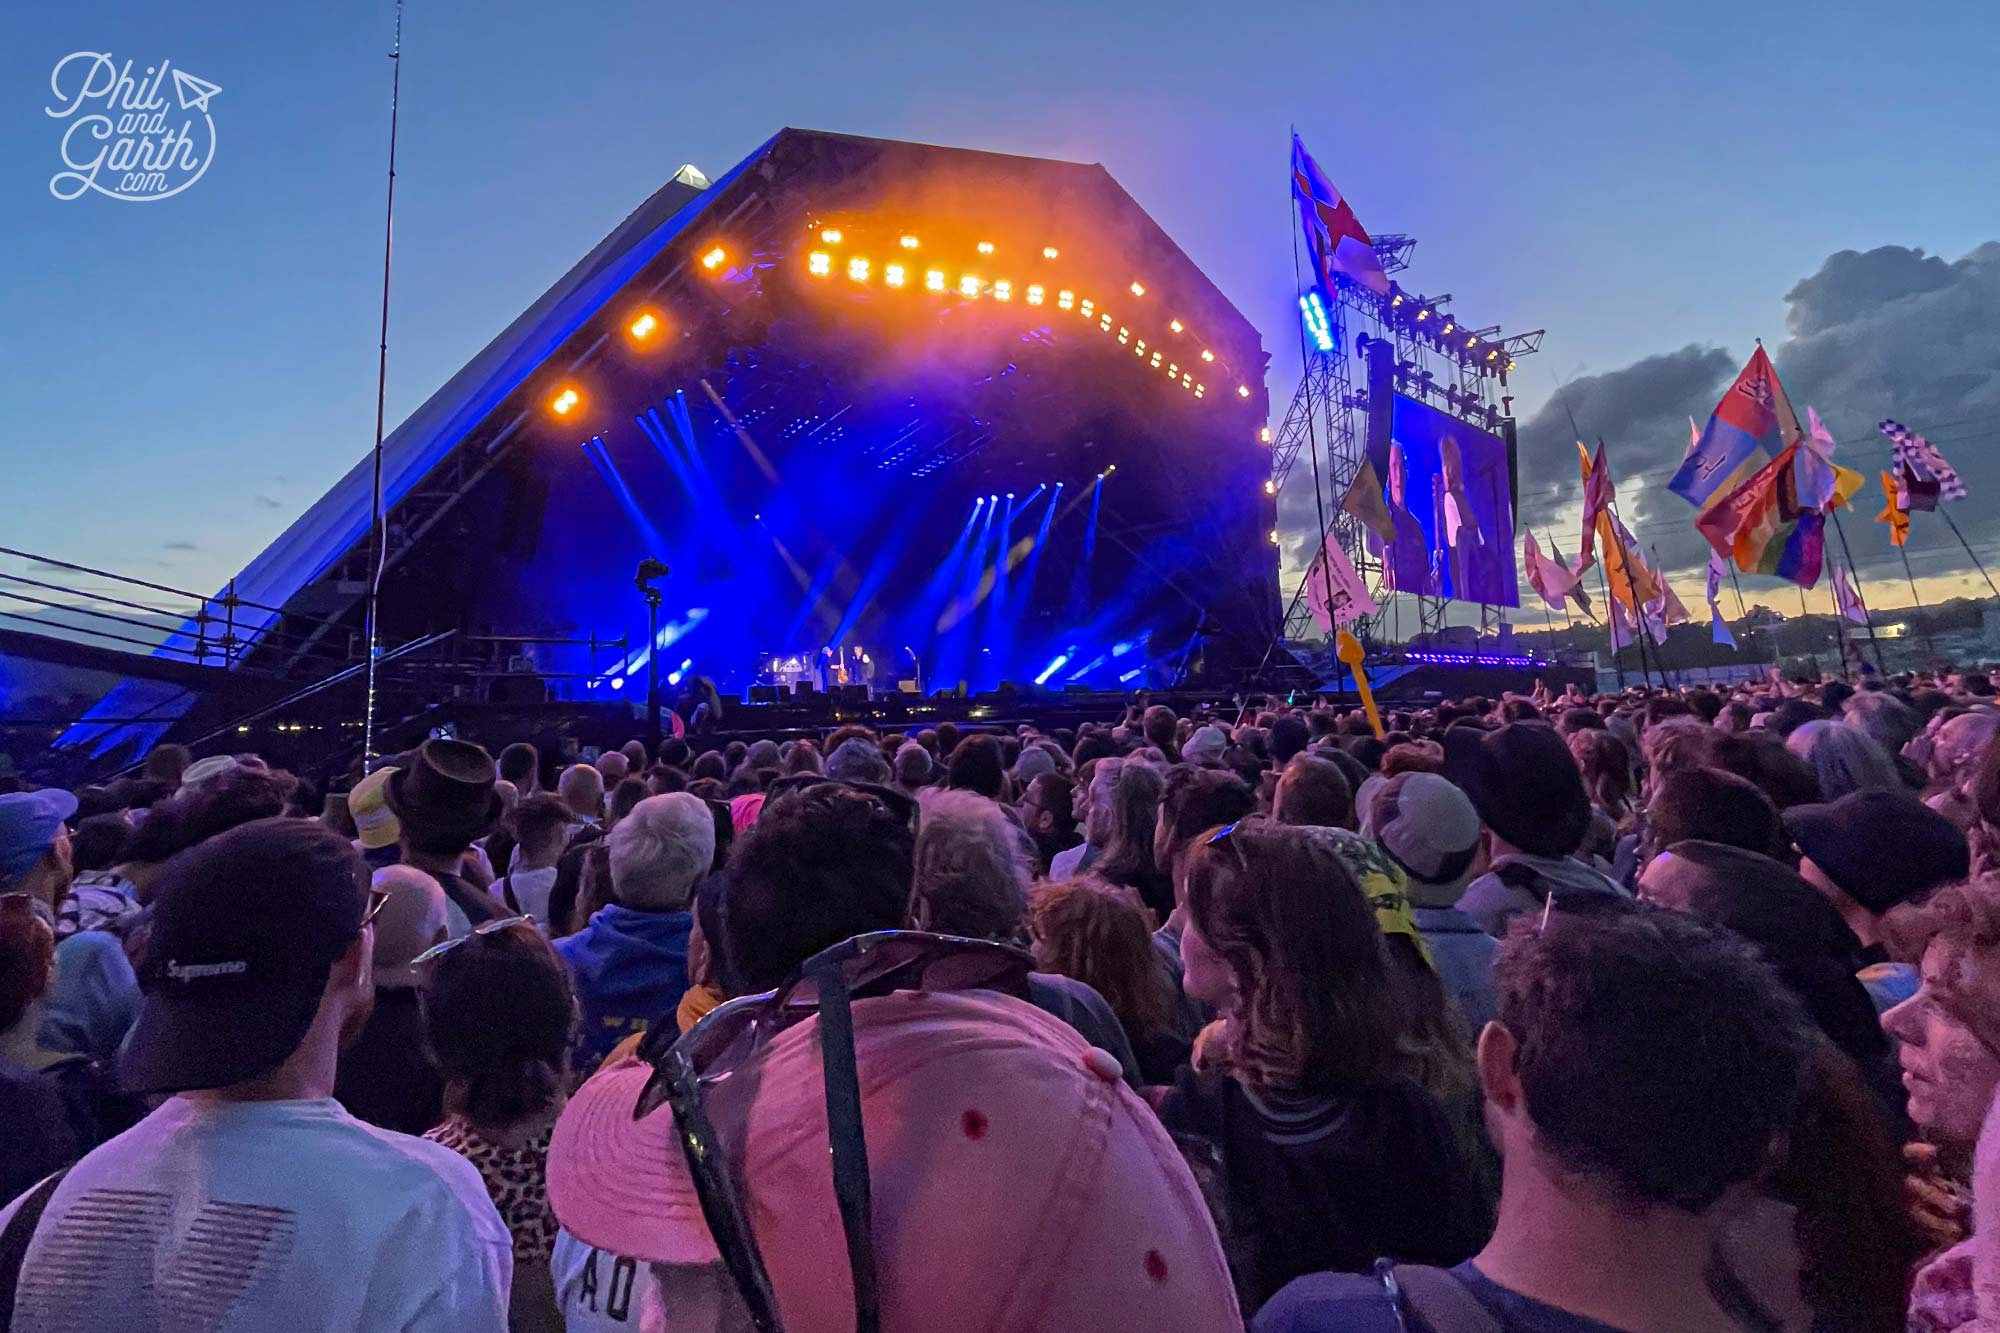 In the heart of the action at the Pyramid Stage